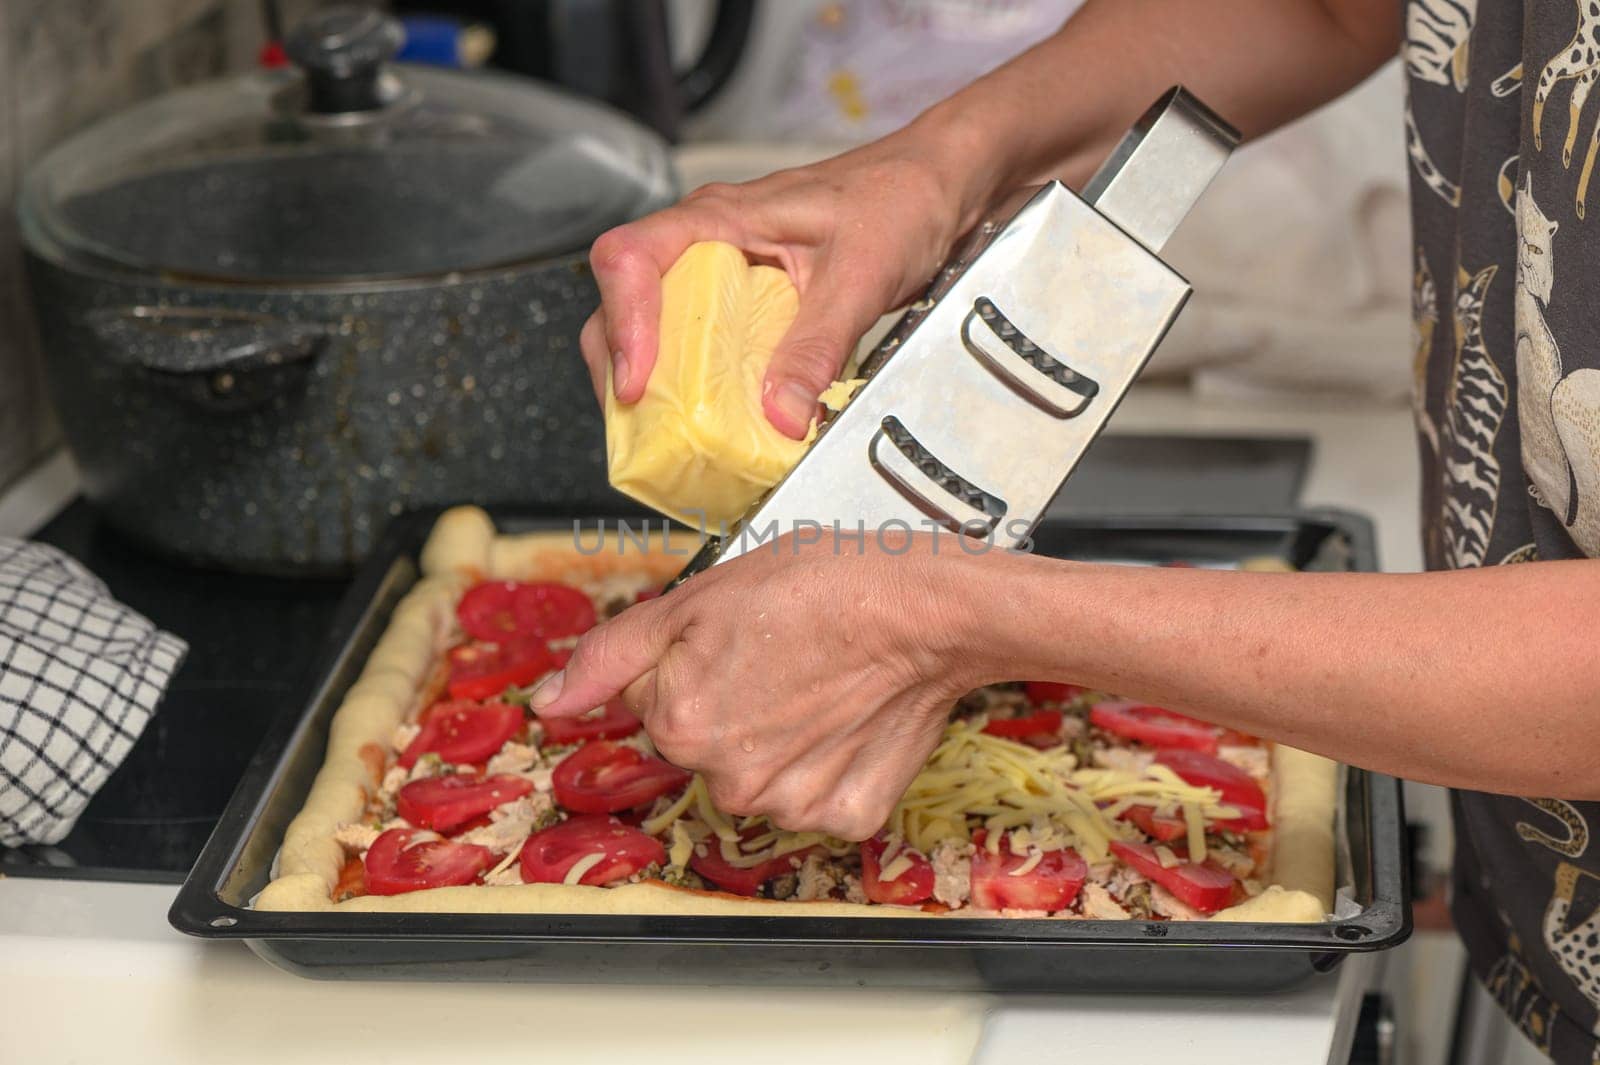 woman prepares pizza with cheese, tomatoes and chicken ham, woman rubs cheese 1